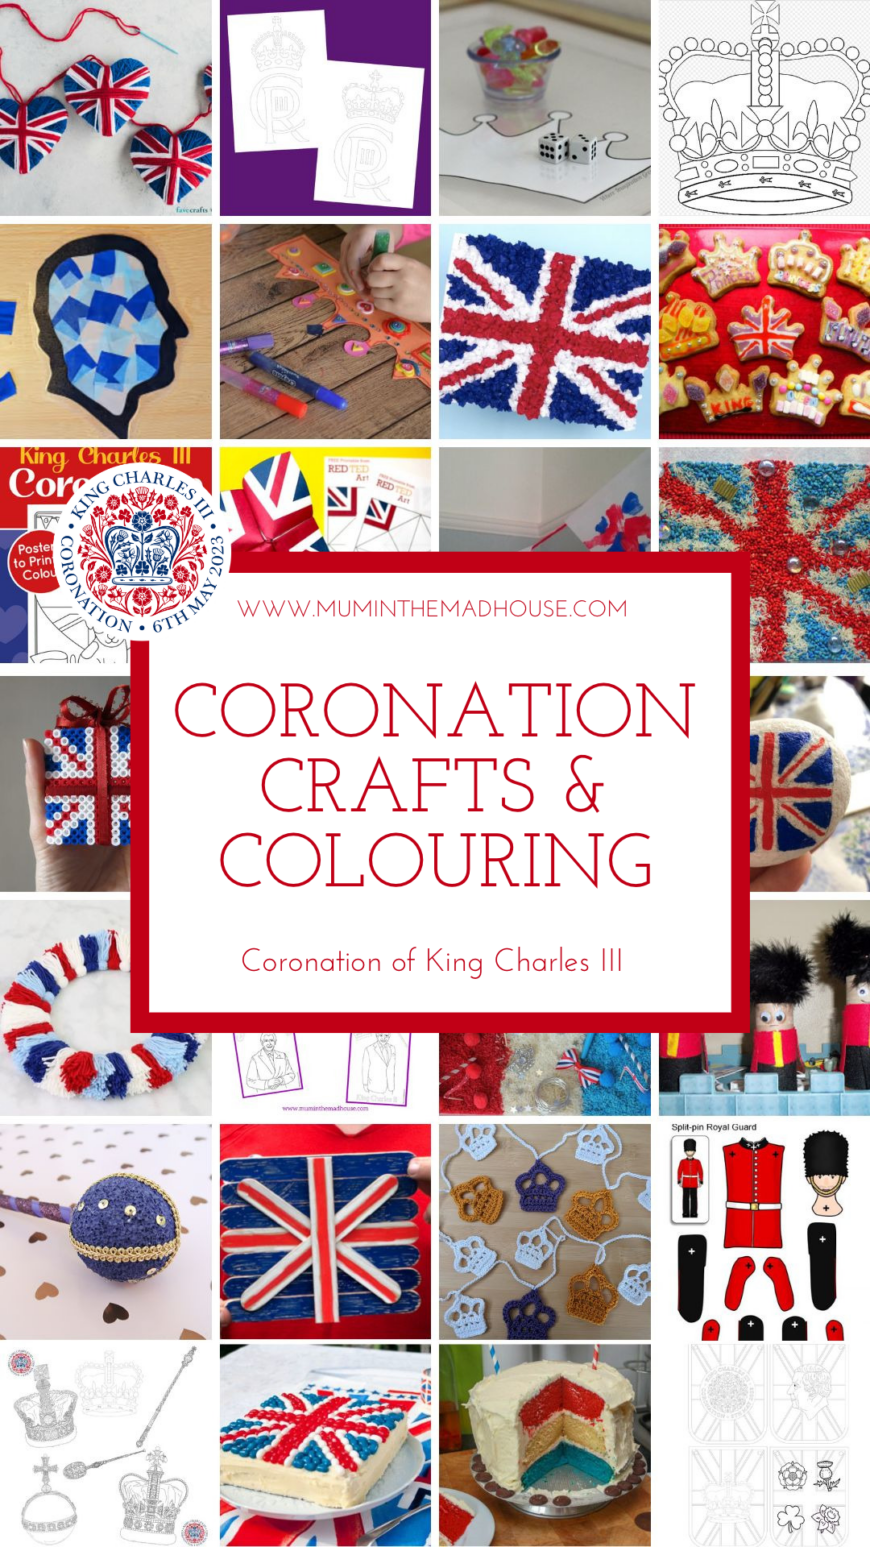 Coronation crafts, free printables, DIY ideas and Royal themed crafts for children 